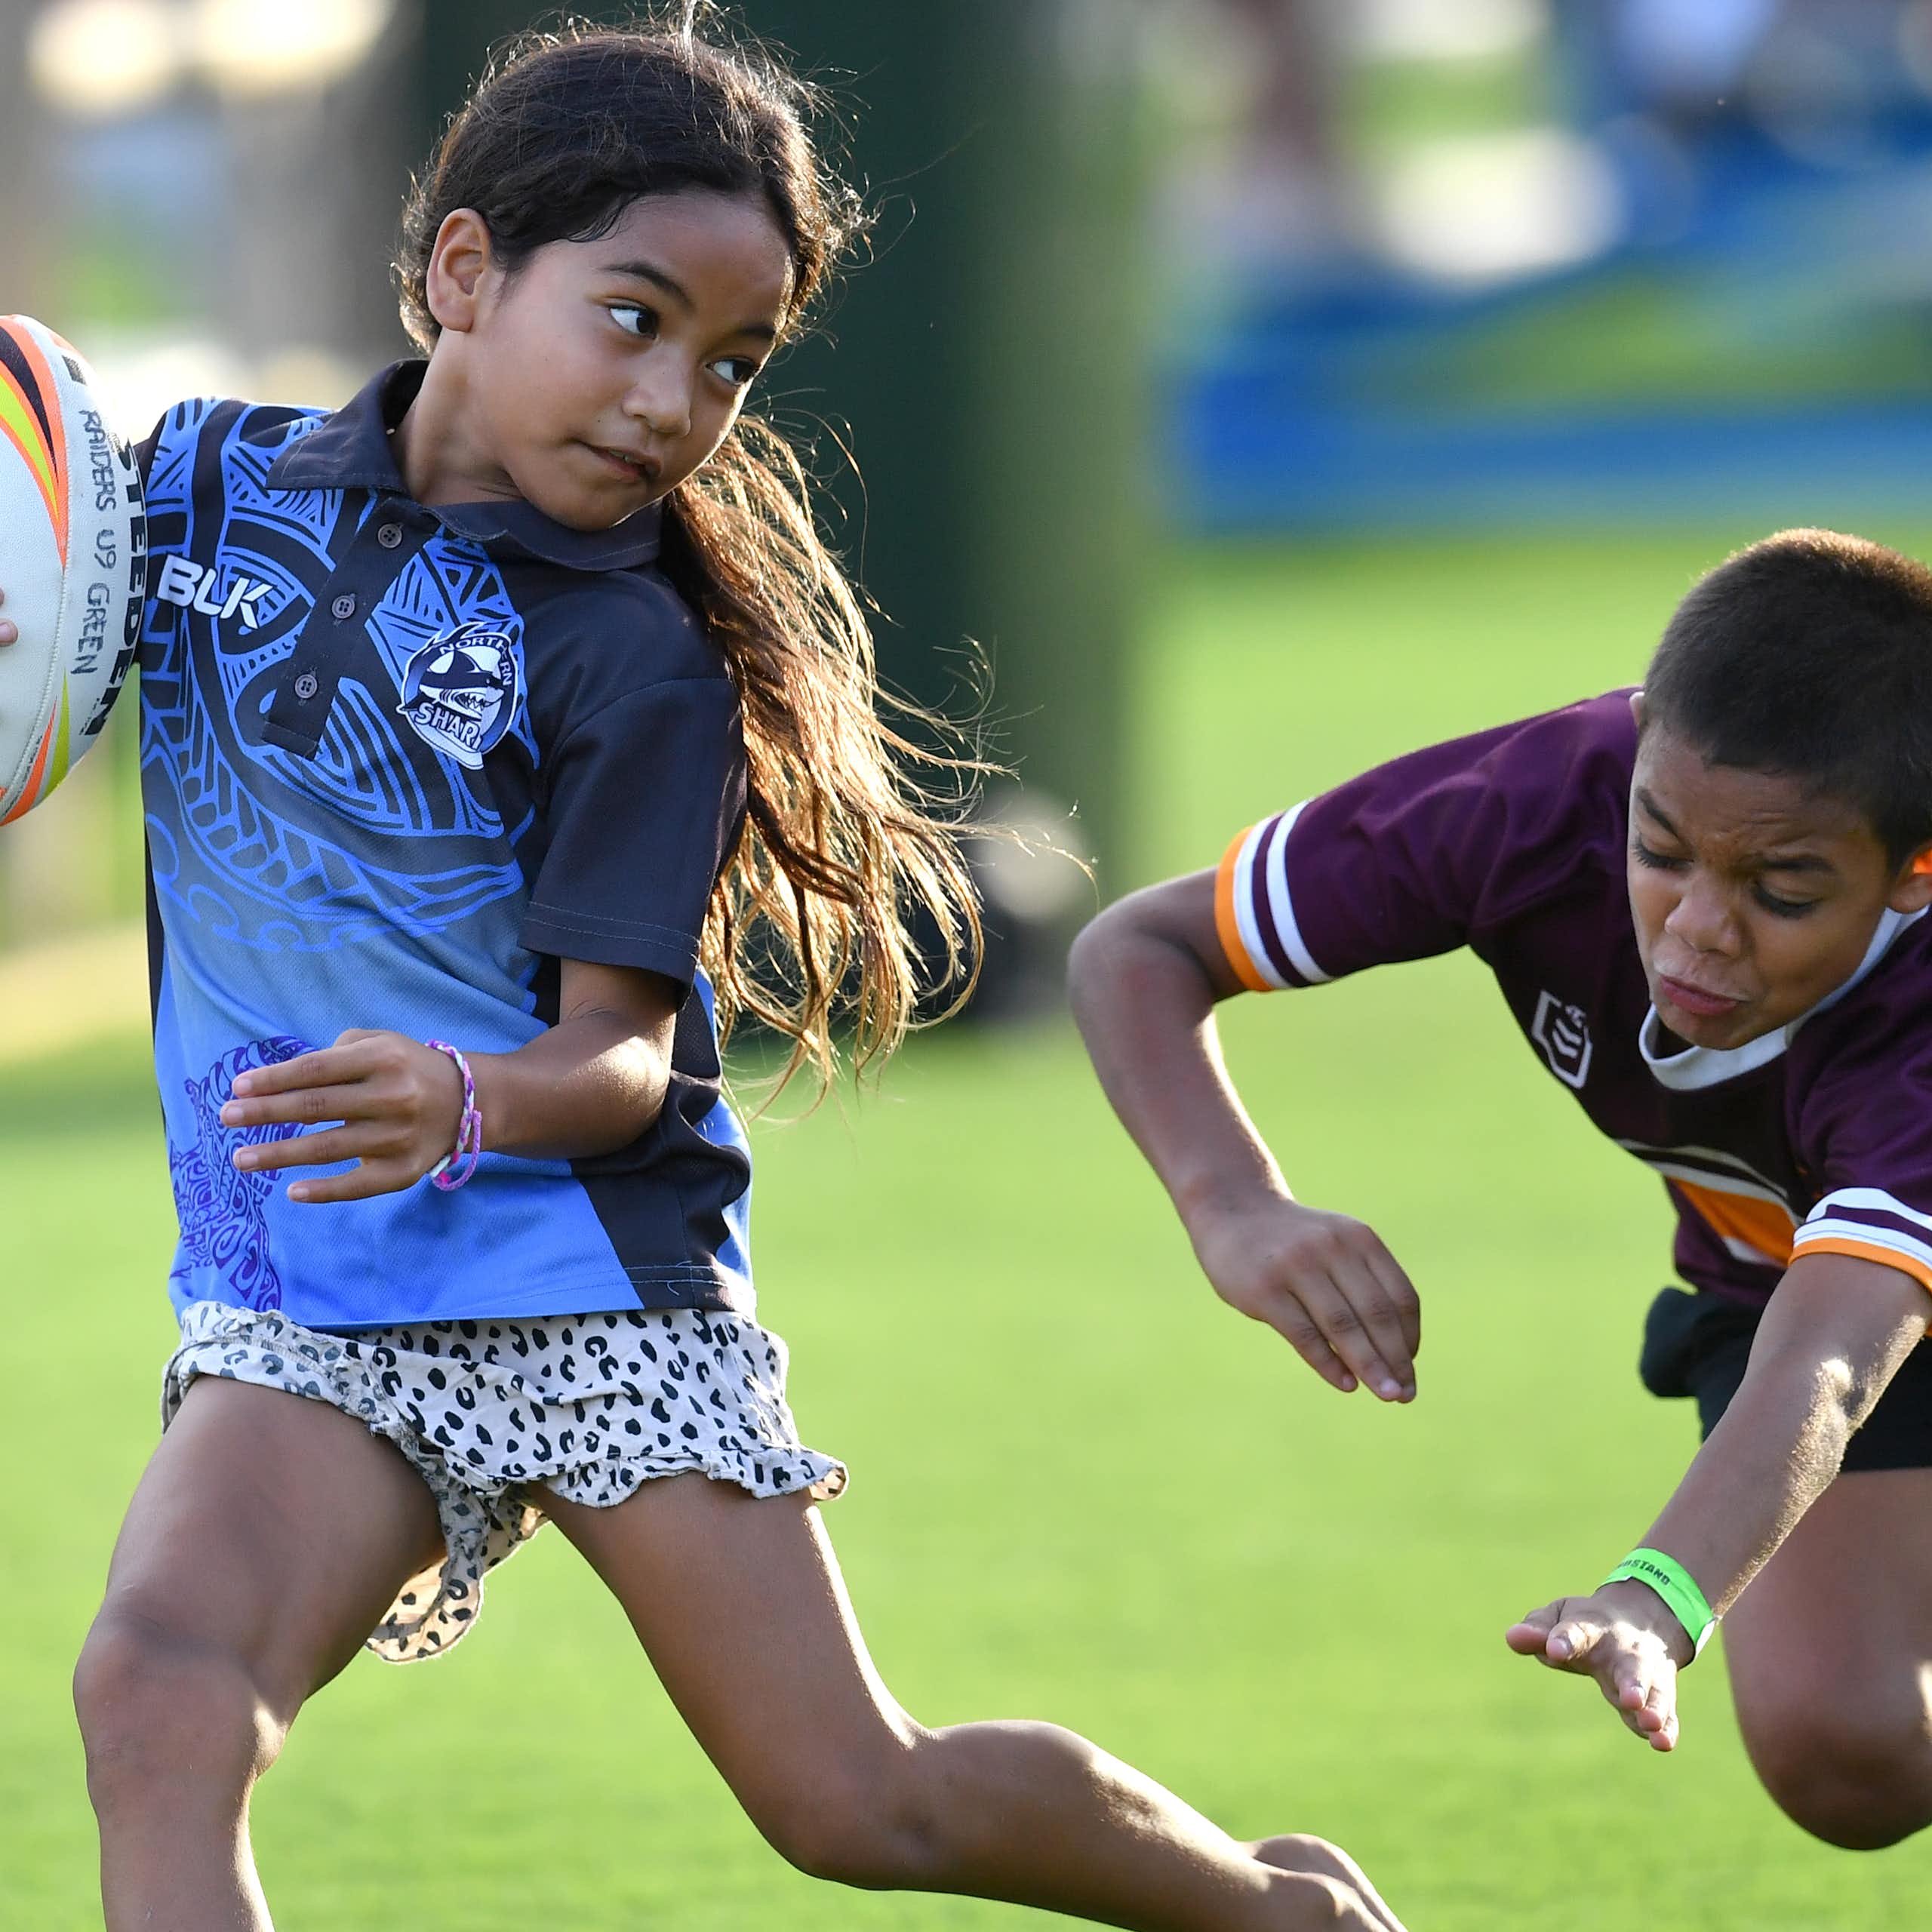 Two children having fun playing rugby league